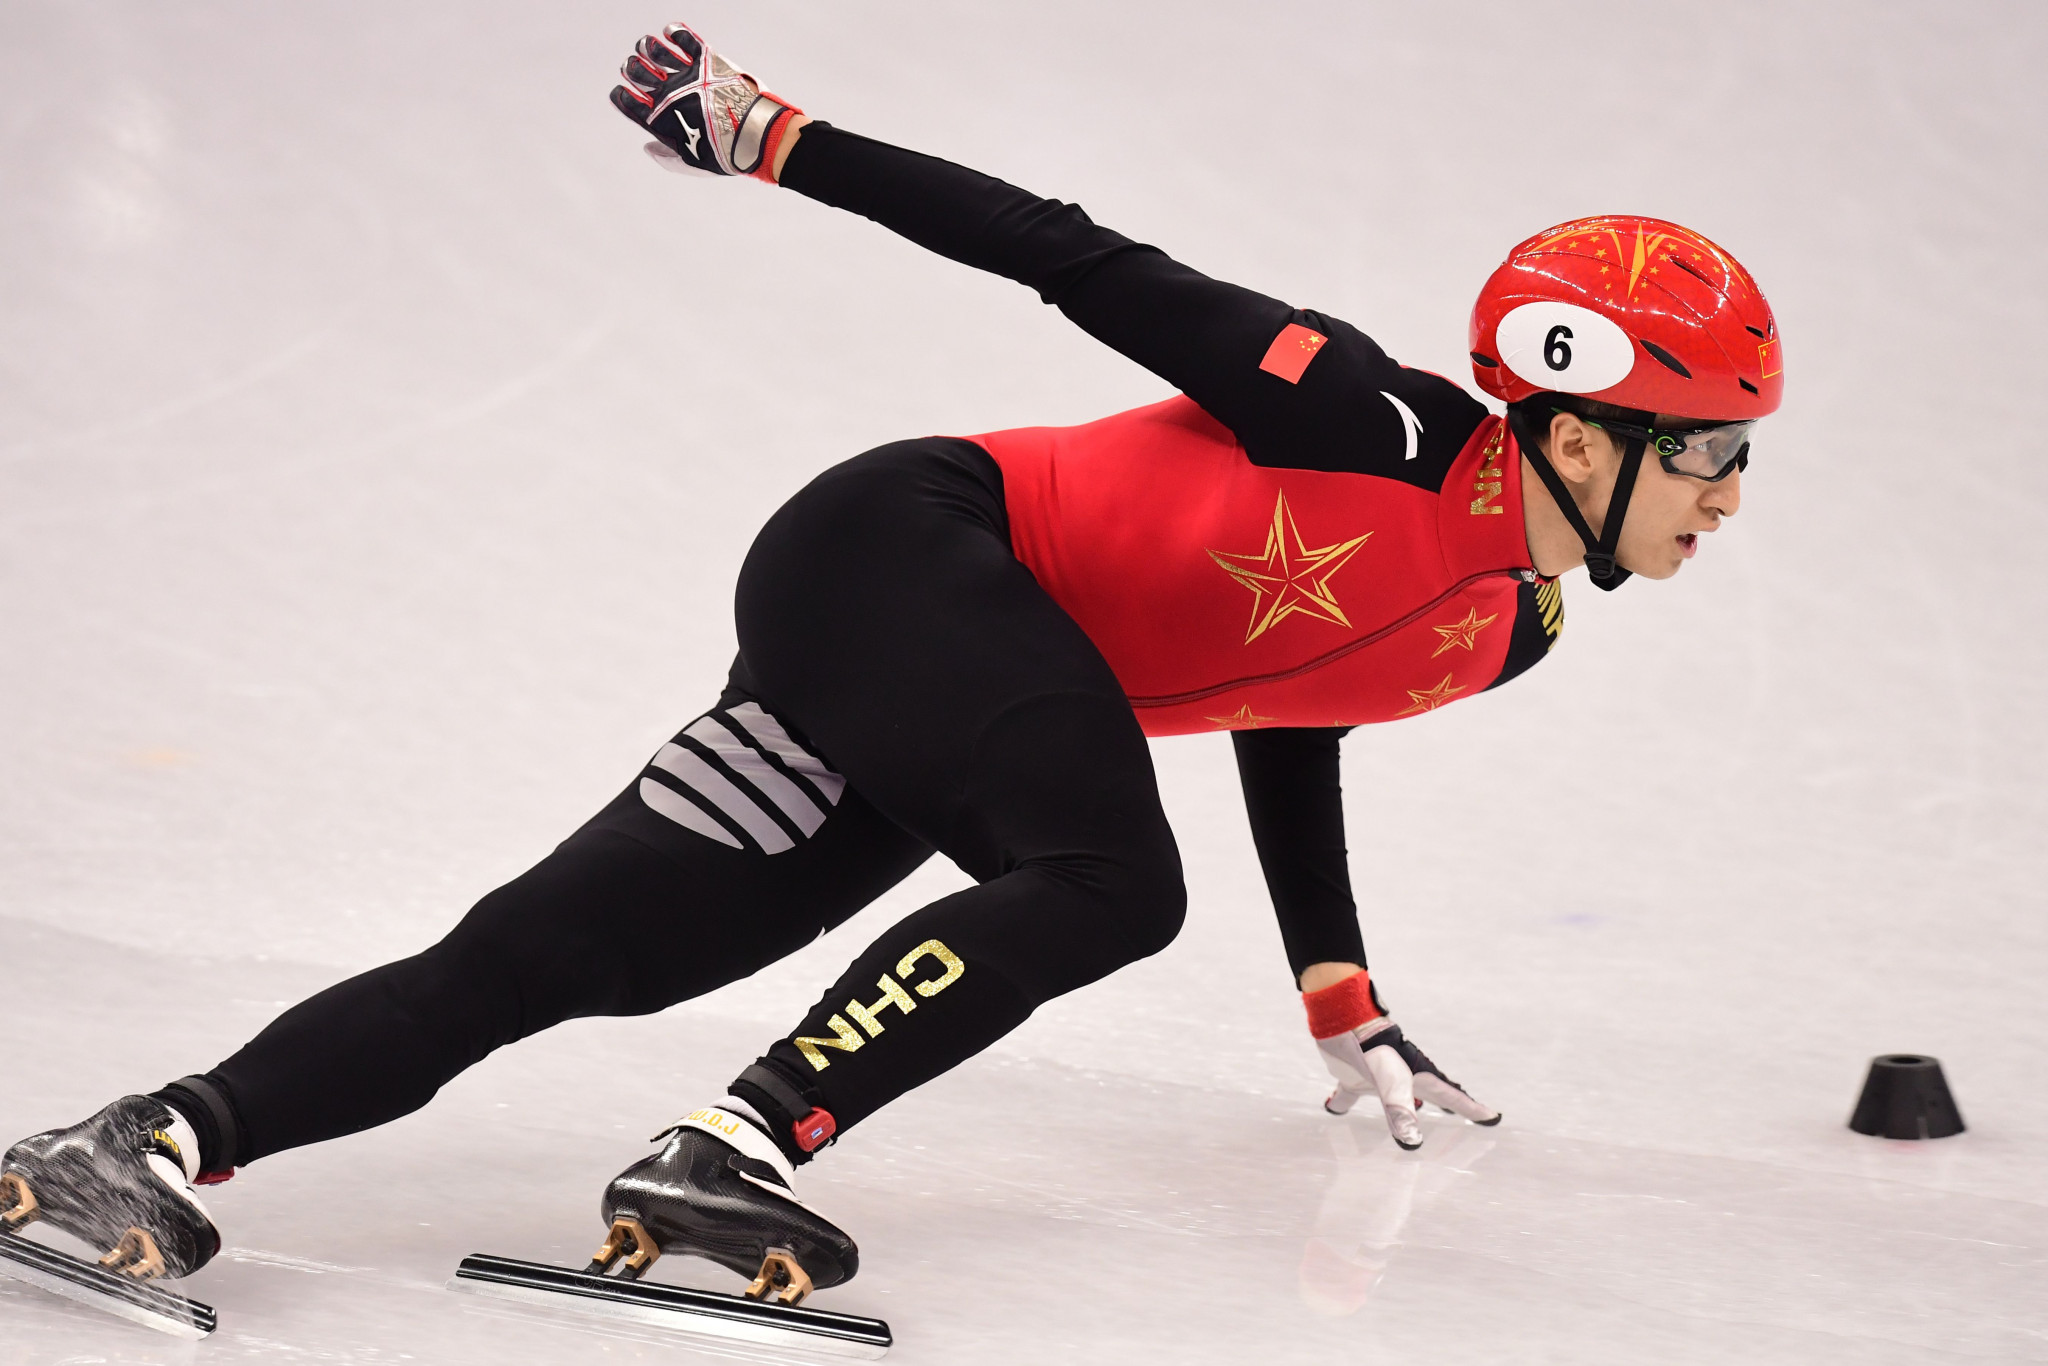 Wu breaks world record to clinch first gold for China at Pyeongchang 2018